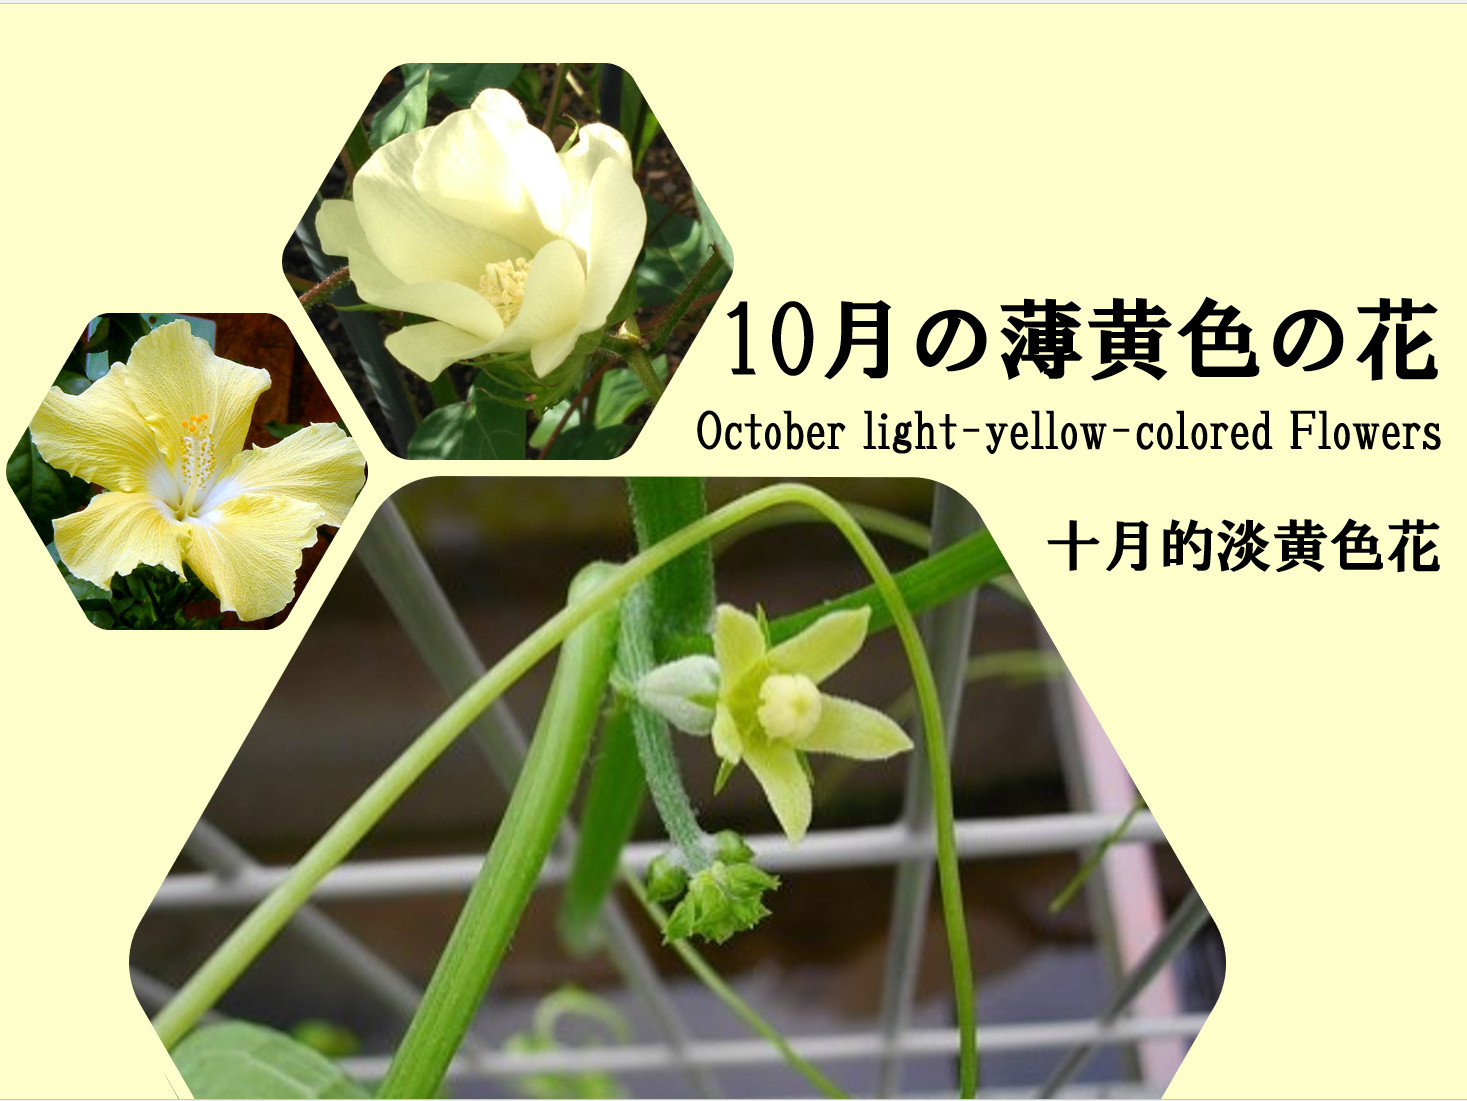 october-light-yellow-colored-flowers